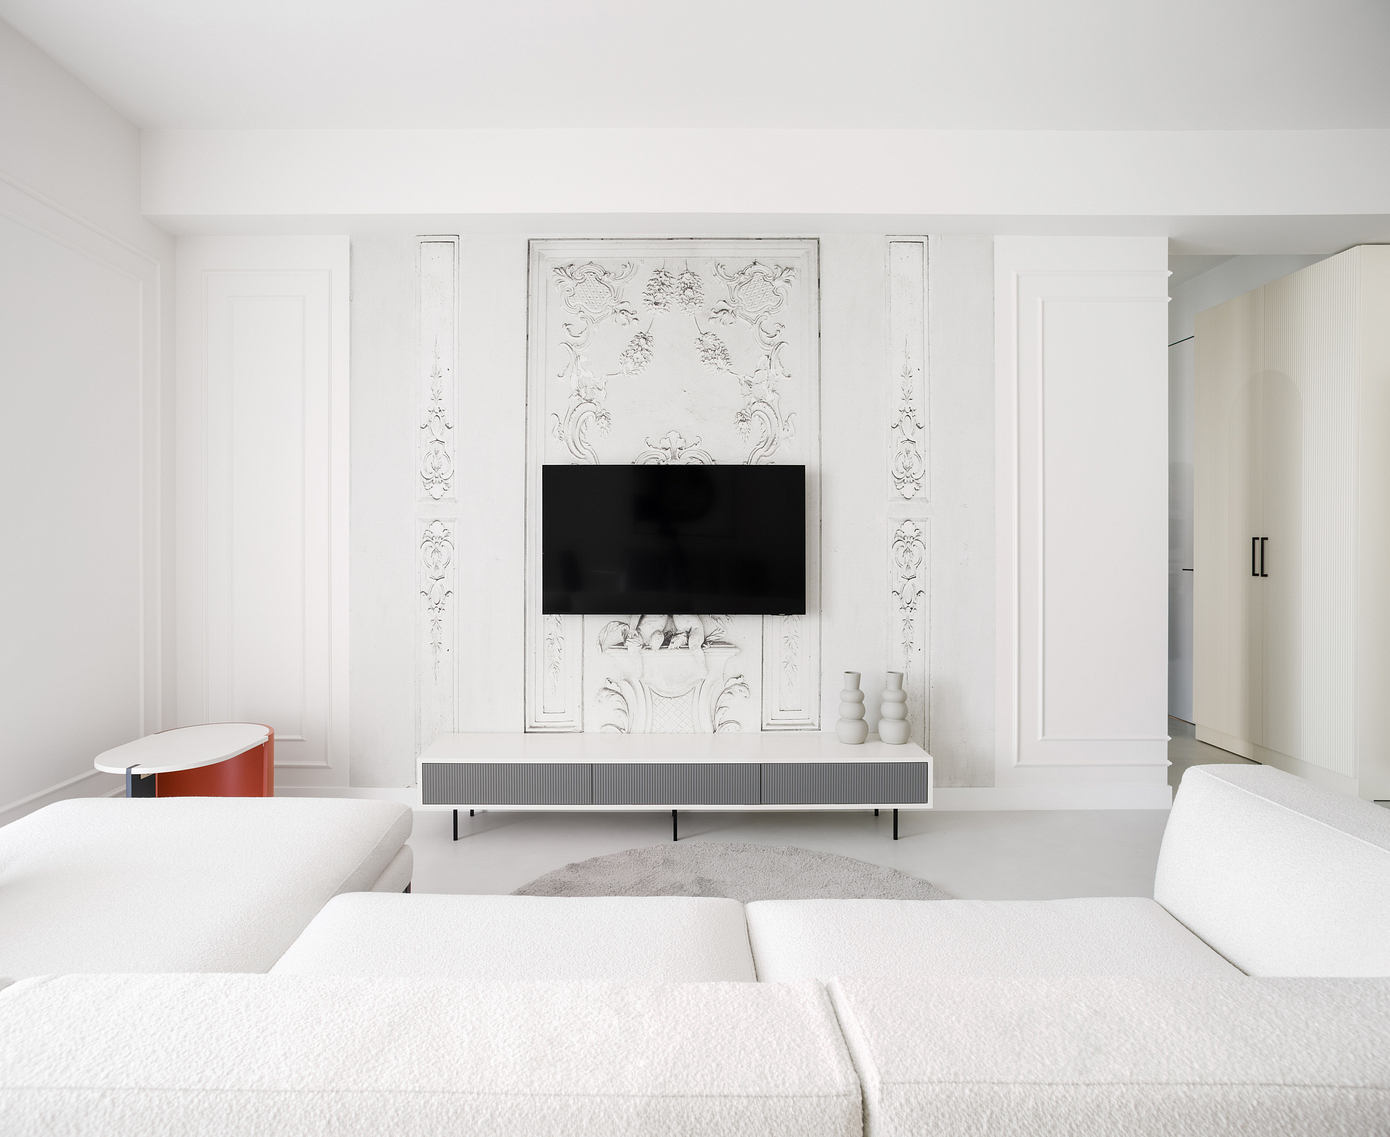 More White than Off-white…: The Minimalist Charm of A Tbilisi Apartment